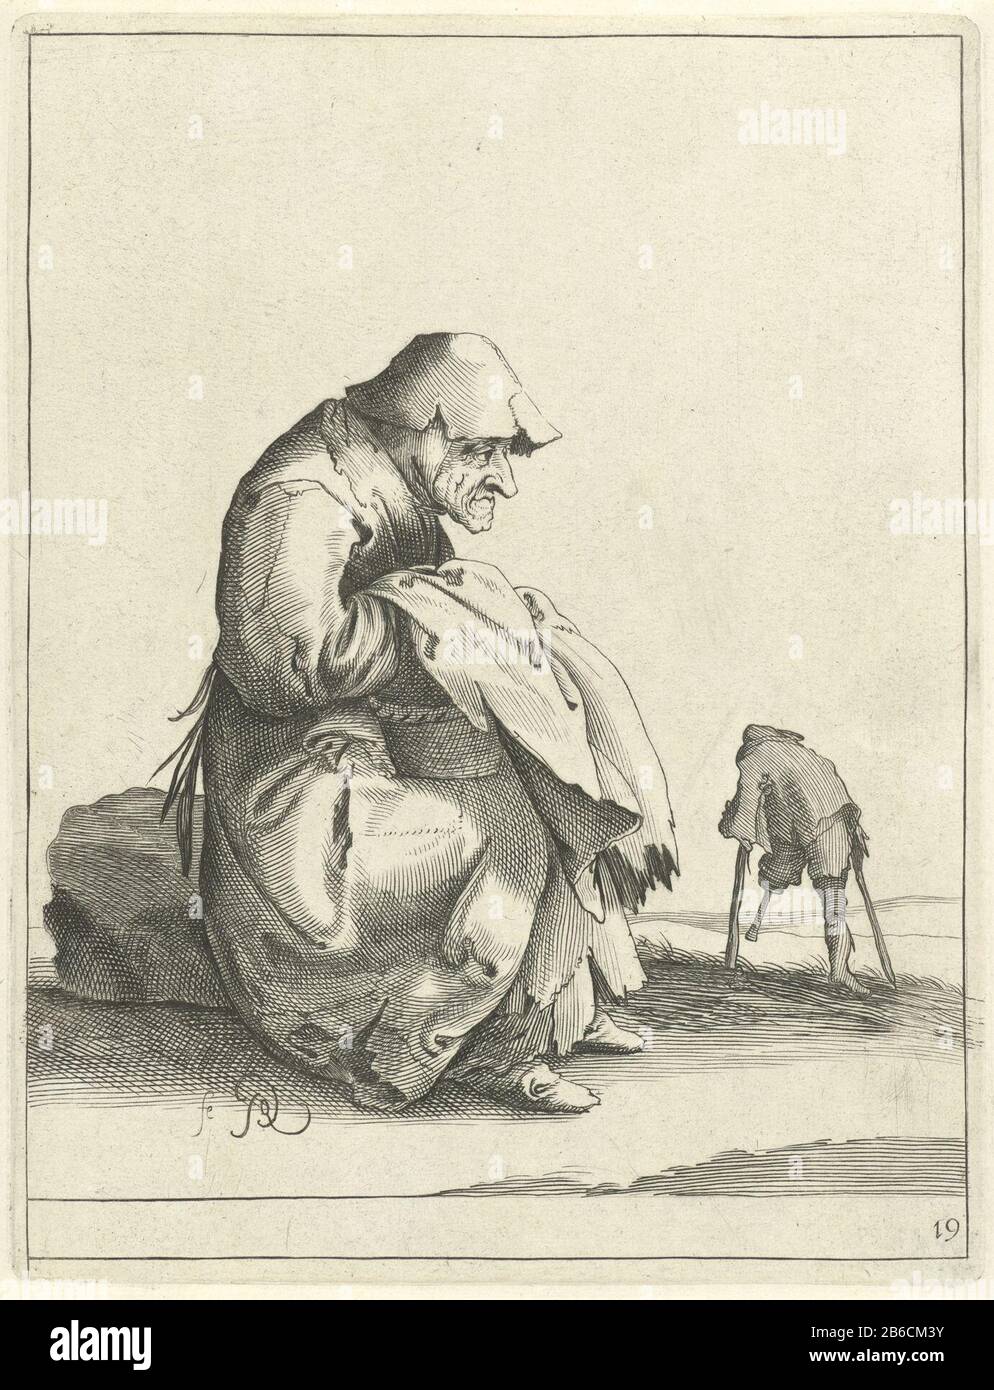 Elderly beggar star Beggars and farmers (serietitel) a stone is an elderly beggar with a basket on her lap and a cloth. Right runs a tramp with a wooden leg, leaning on crutches. The print is a part of a series of twenty-six prints with bums and boeren. Manufacturer : print maker: Pieter Jansz. Quast (indicated on object) Place manufacture: The Hague Date: 1634 - 1638 Physical characteristics: etching and engra material: paper Technique: etching / engra (printing process) Measurements: plate edge: H 209 mm × W 160 mm Subject: beggarcrutcheswooden legcontainer made of plant material other than Stock Photo